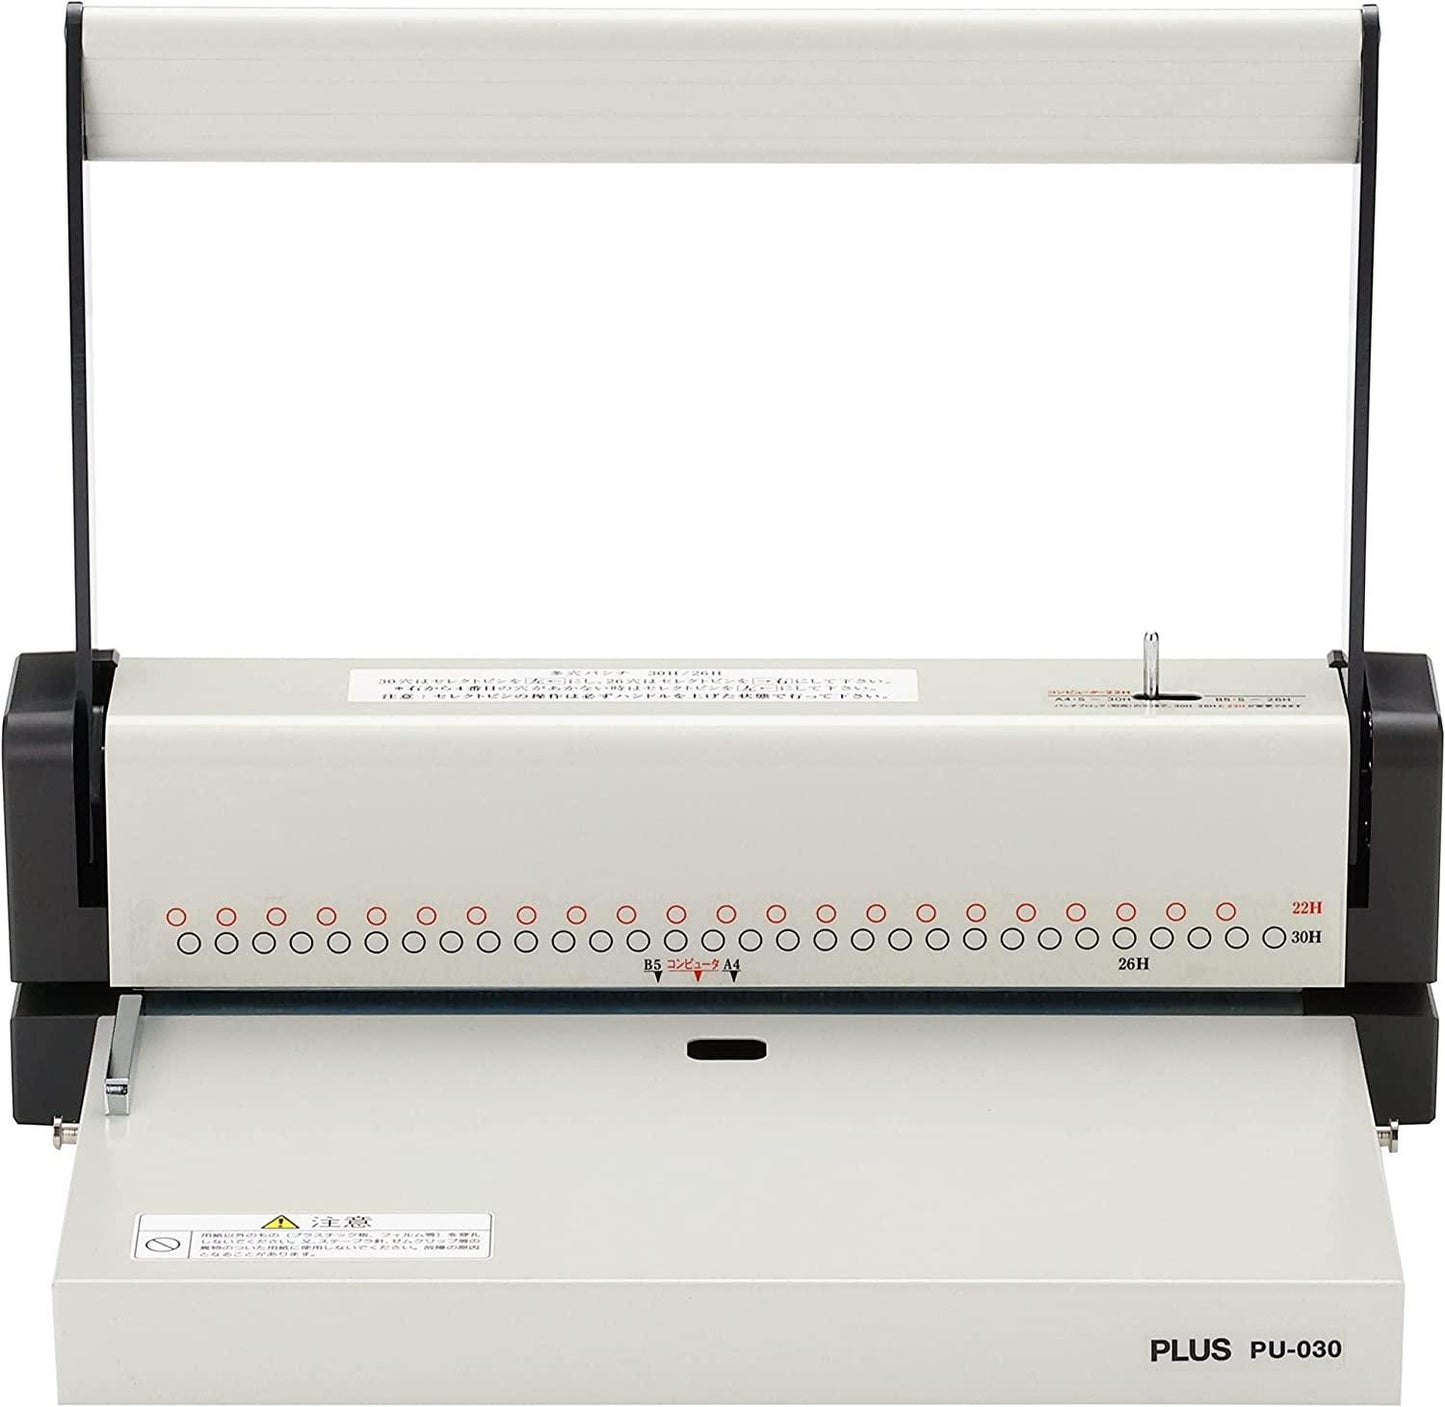 Powerful Multi-hole Punch - Pre-Order Now and Get Organized - Effortlessly  punch up to 30 sheets at once! – CHL-STORE